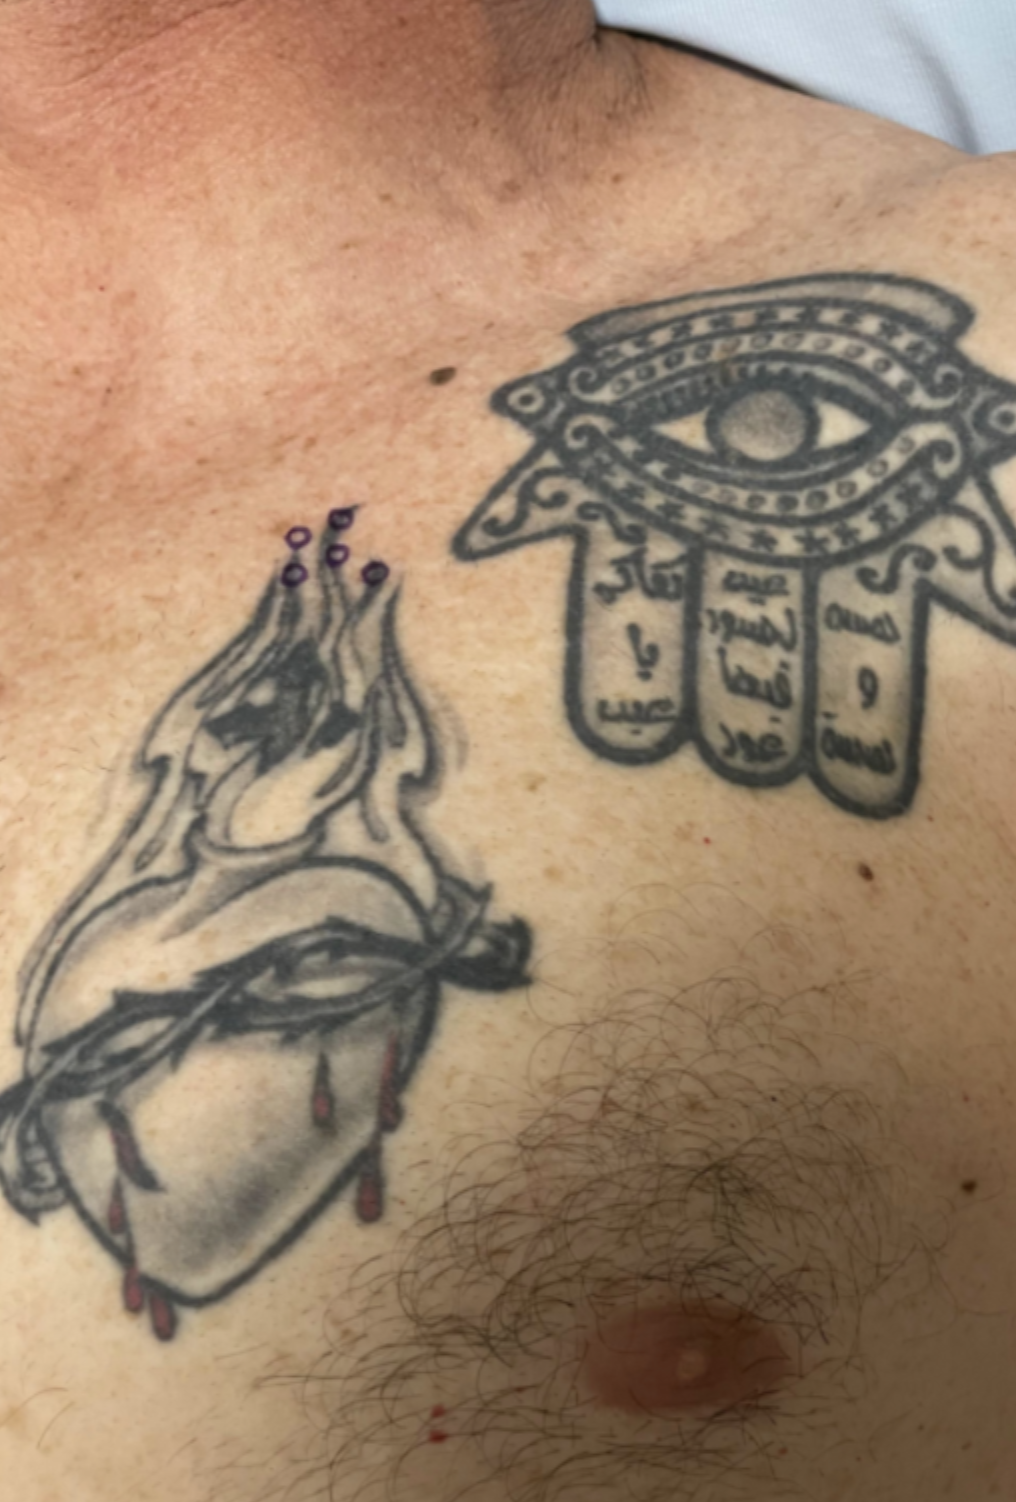 chest tattoo before removal